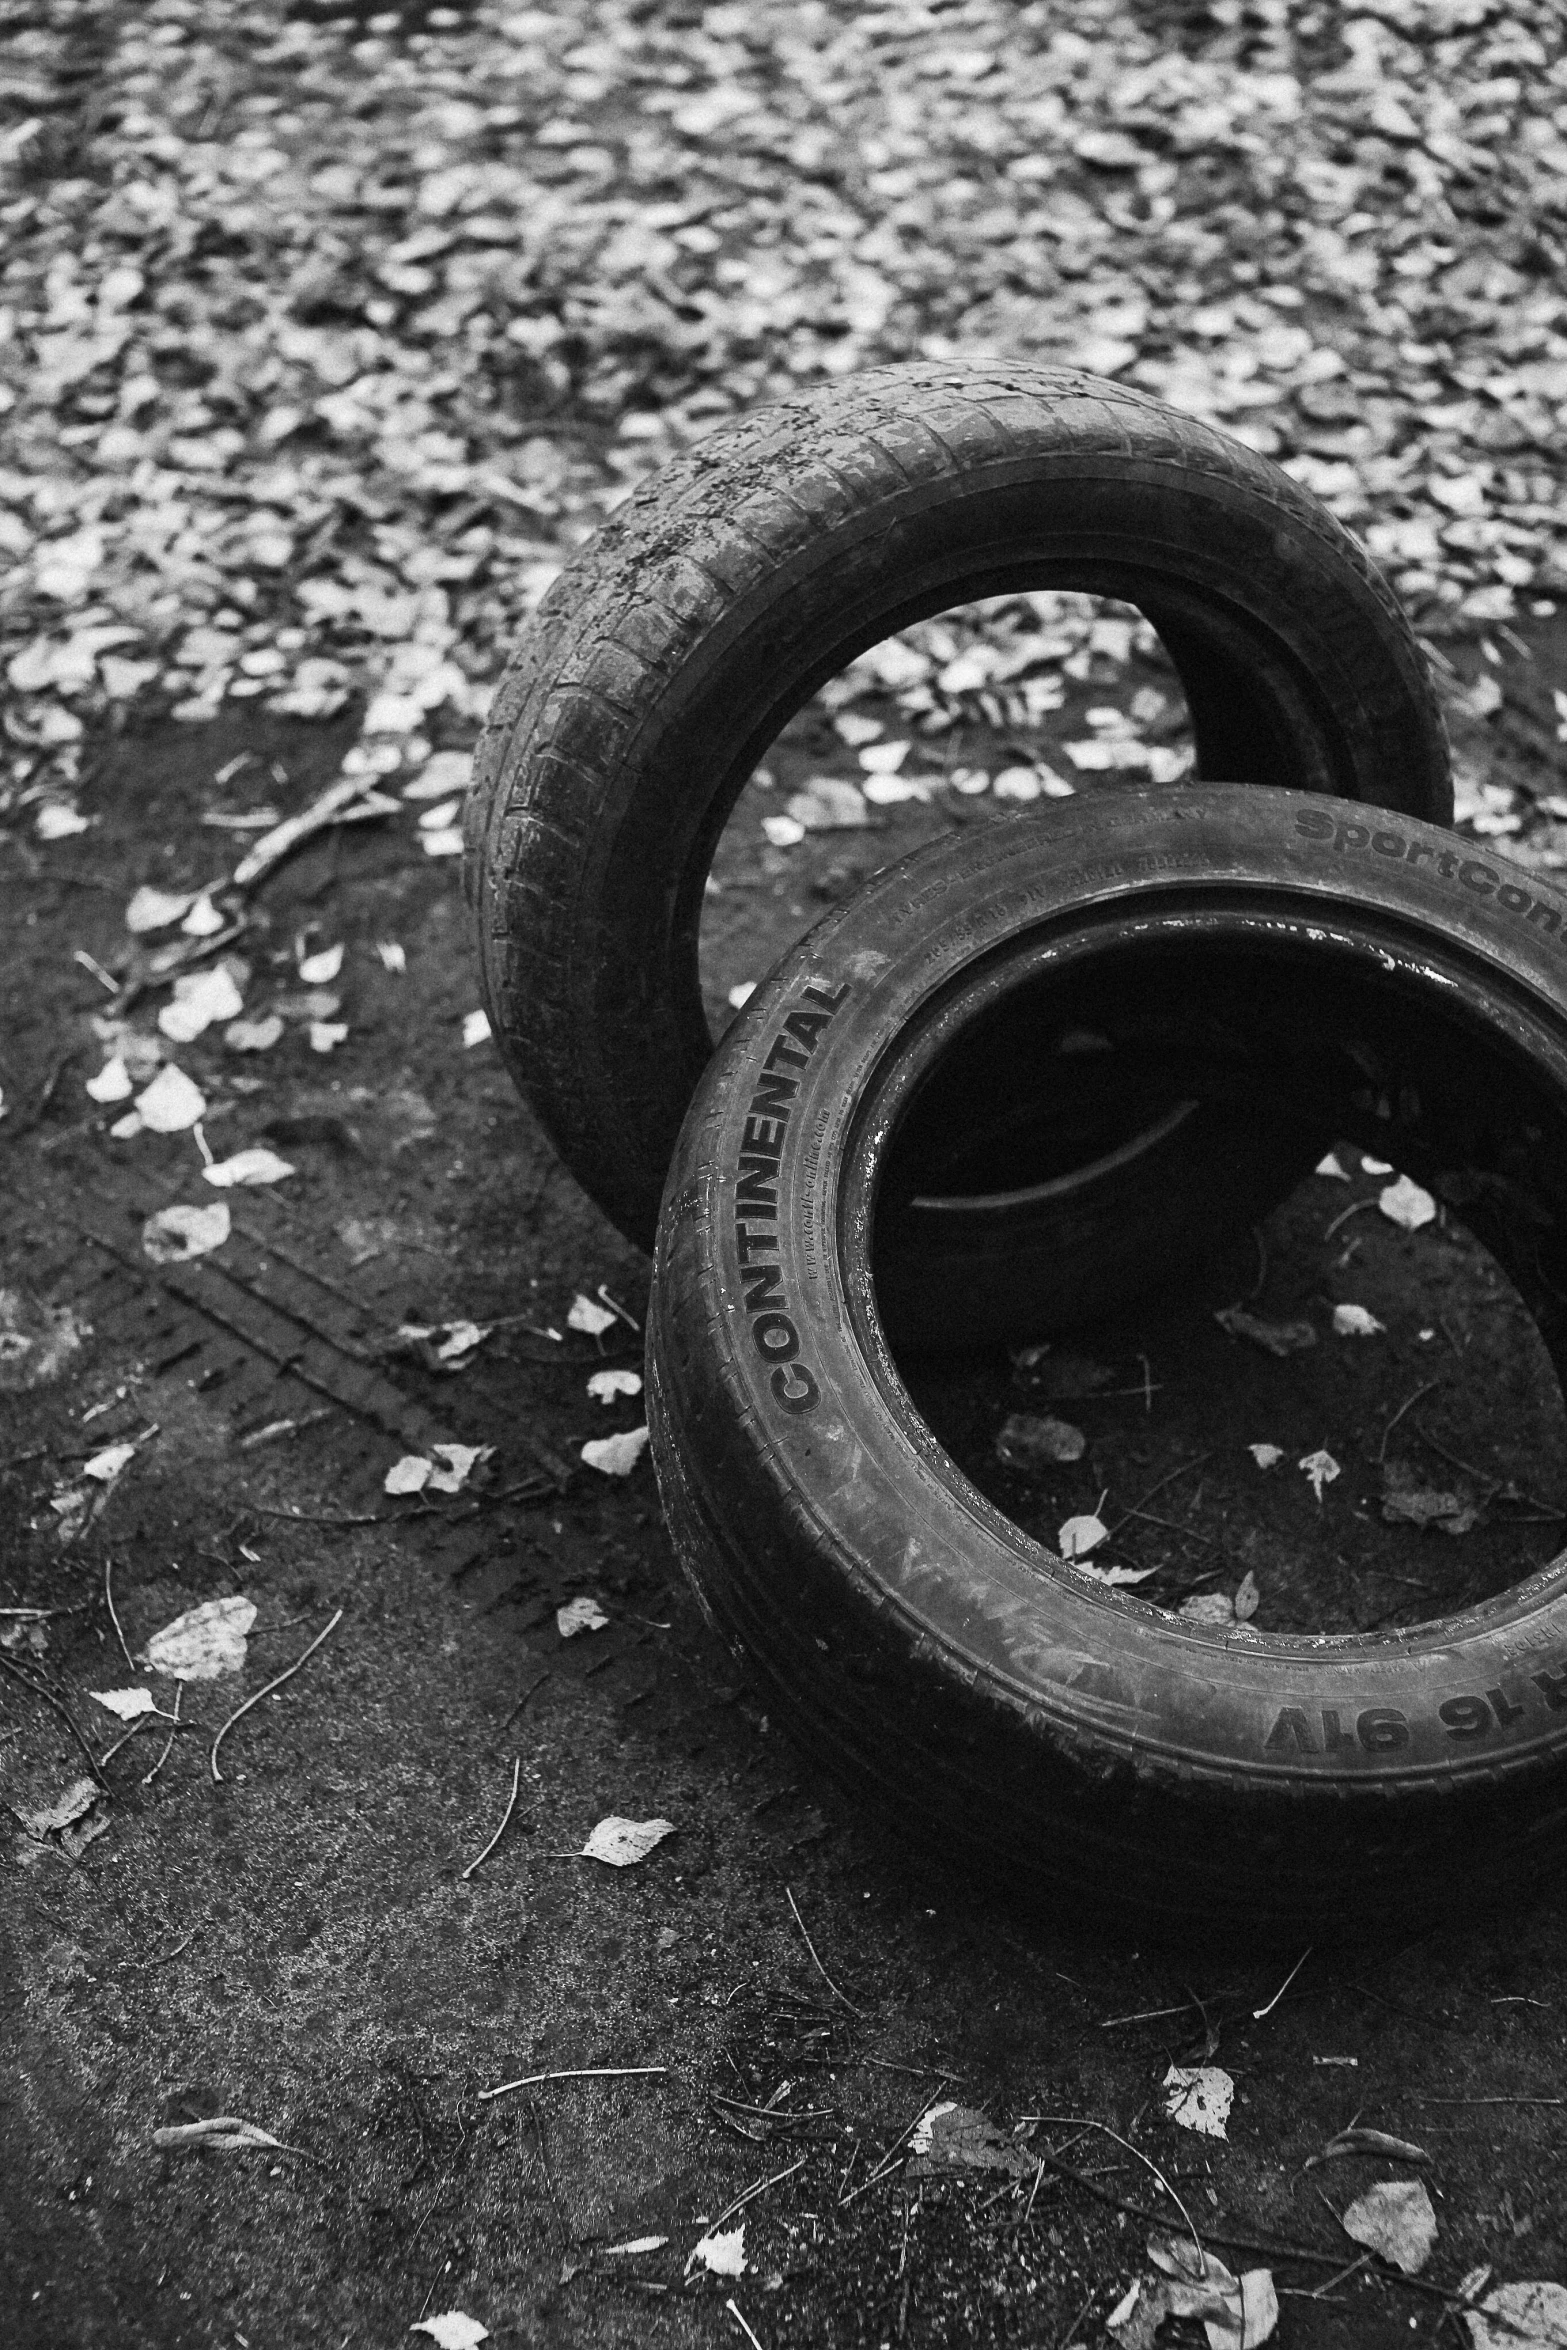 two worn tires lie on the ground with the leaves scattered